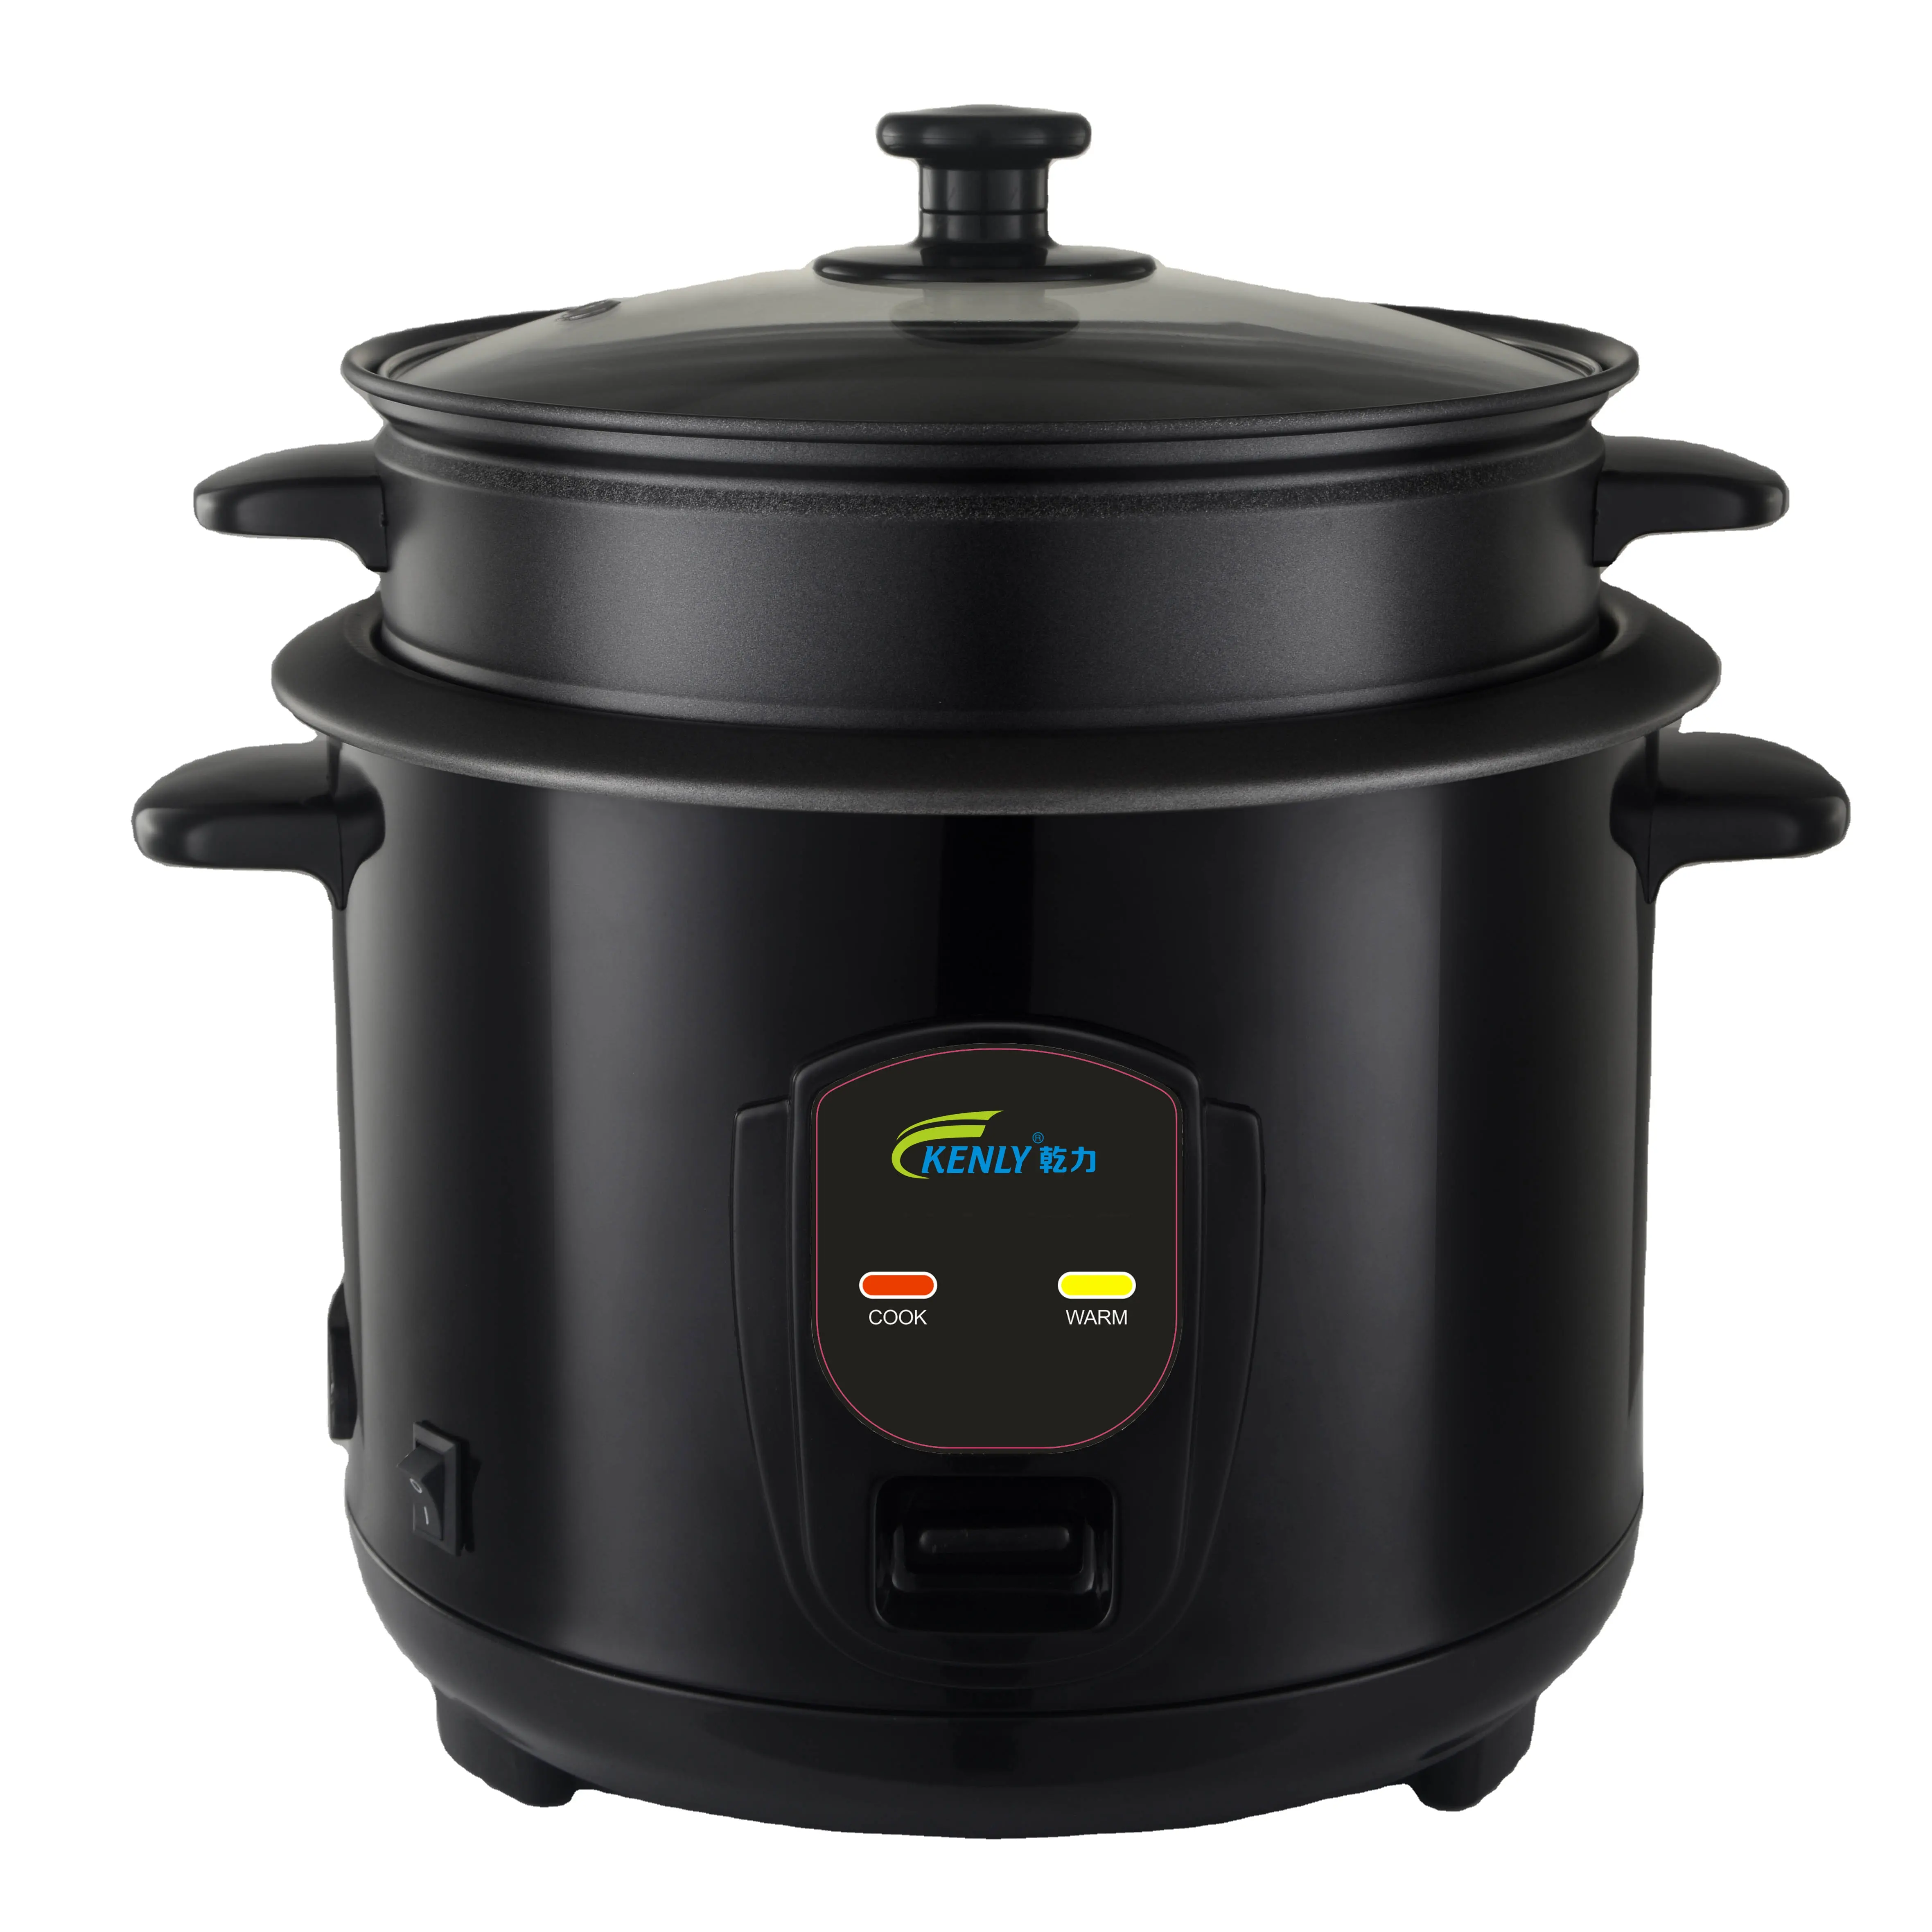 New arrival Europe Cylinder Rice Cooker 1.8L/2.8L with cut off button CE CB LFGB RoSH